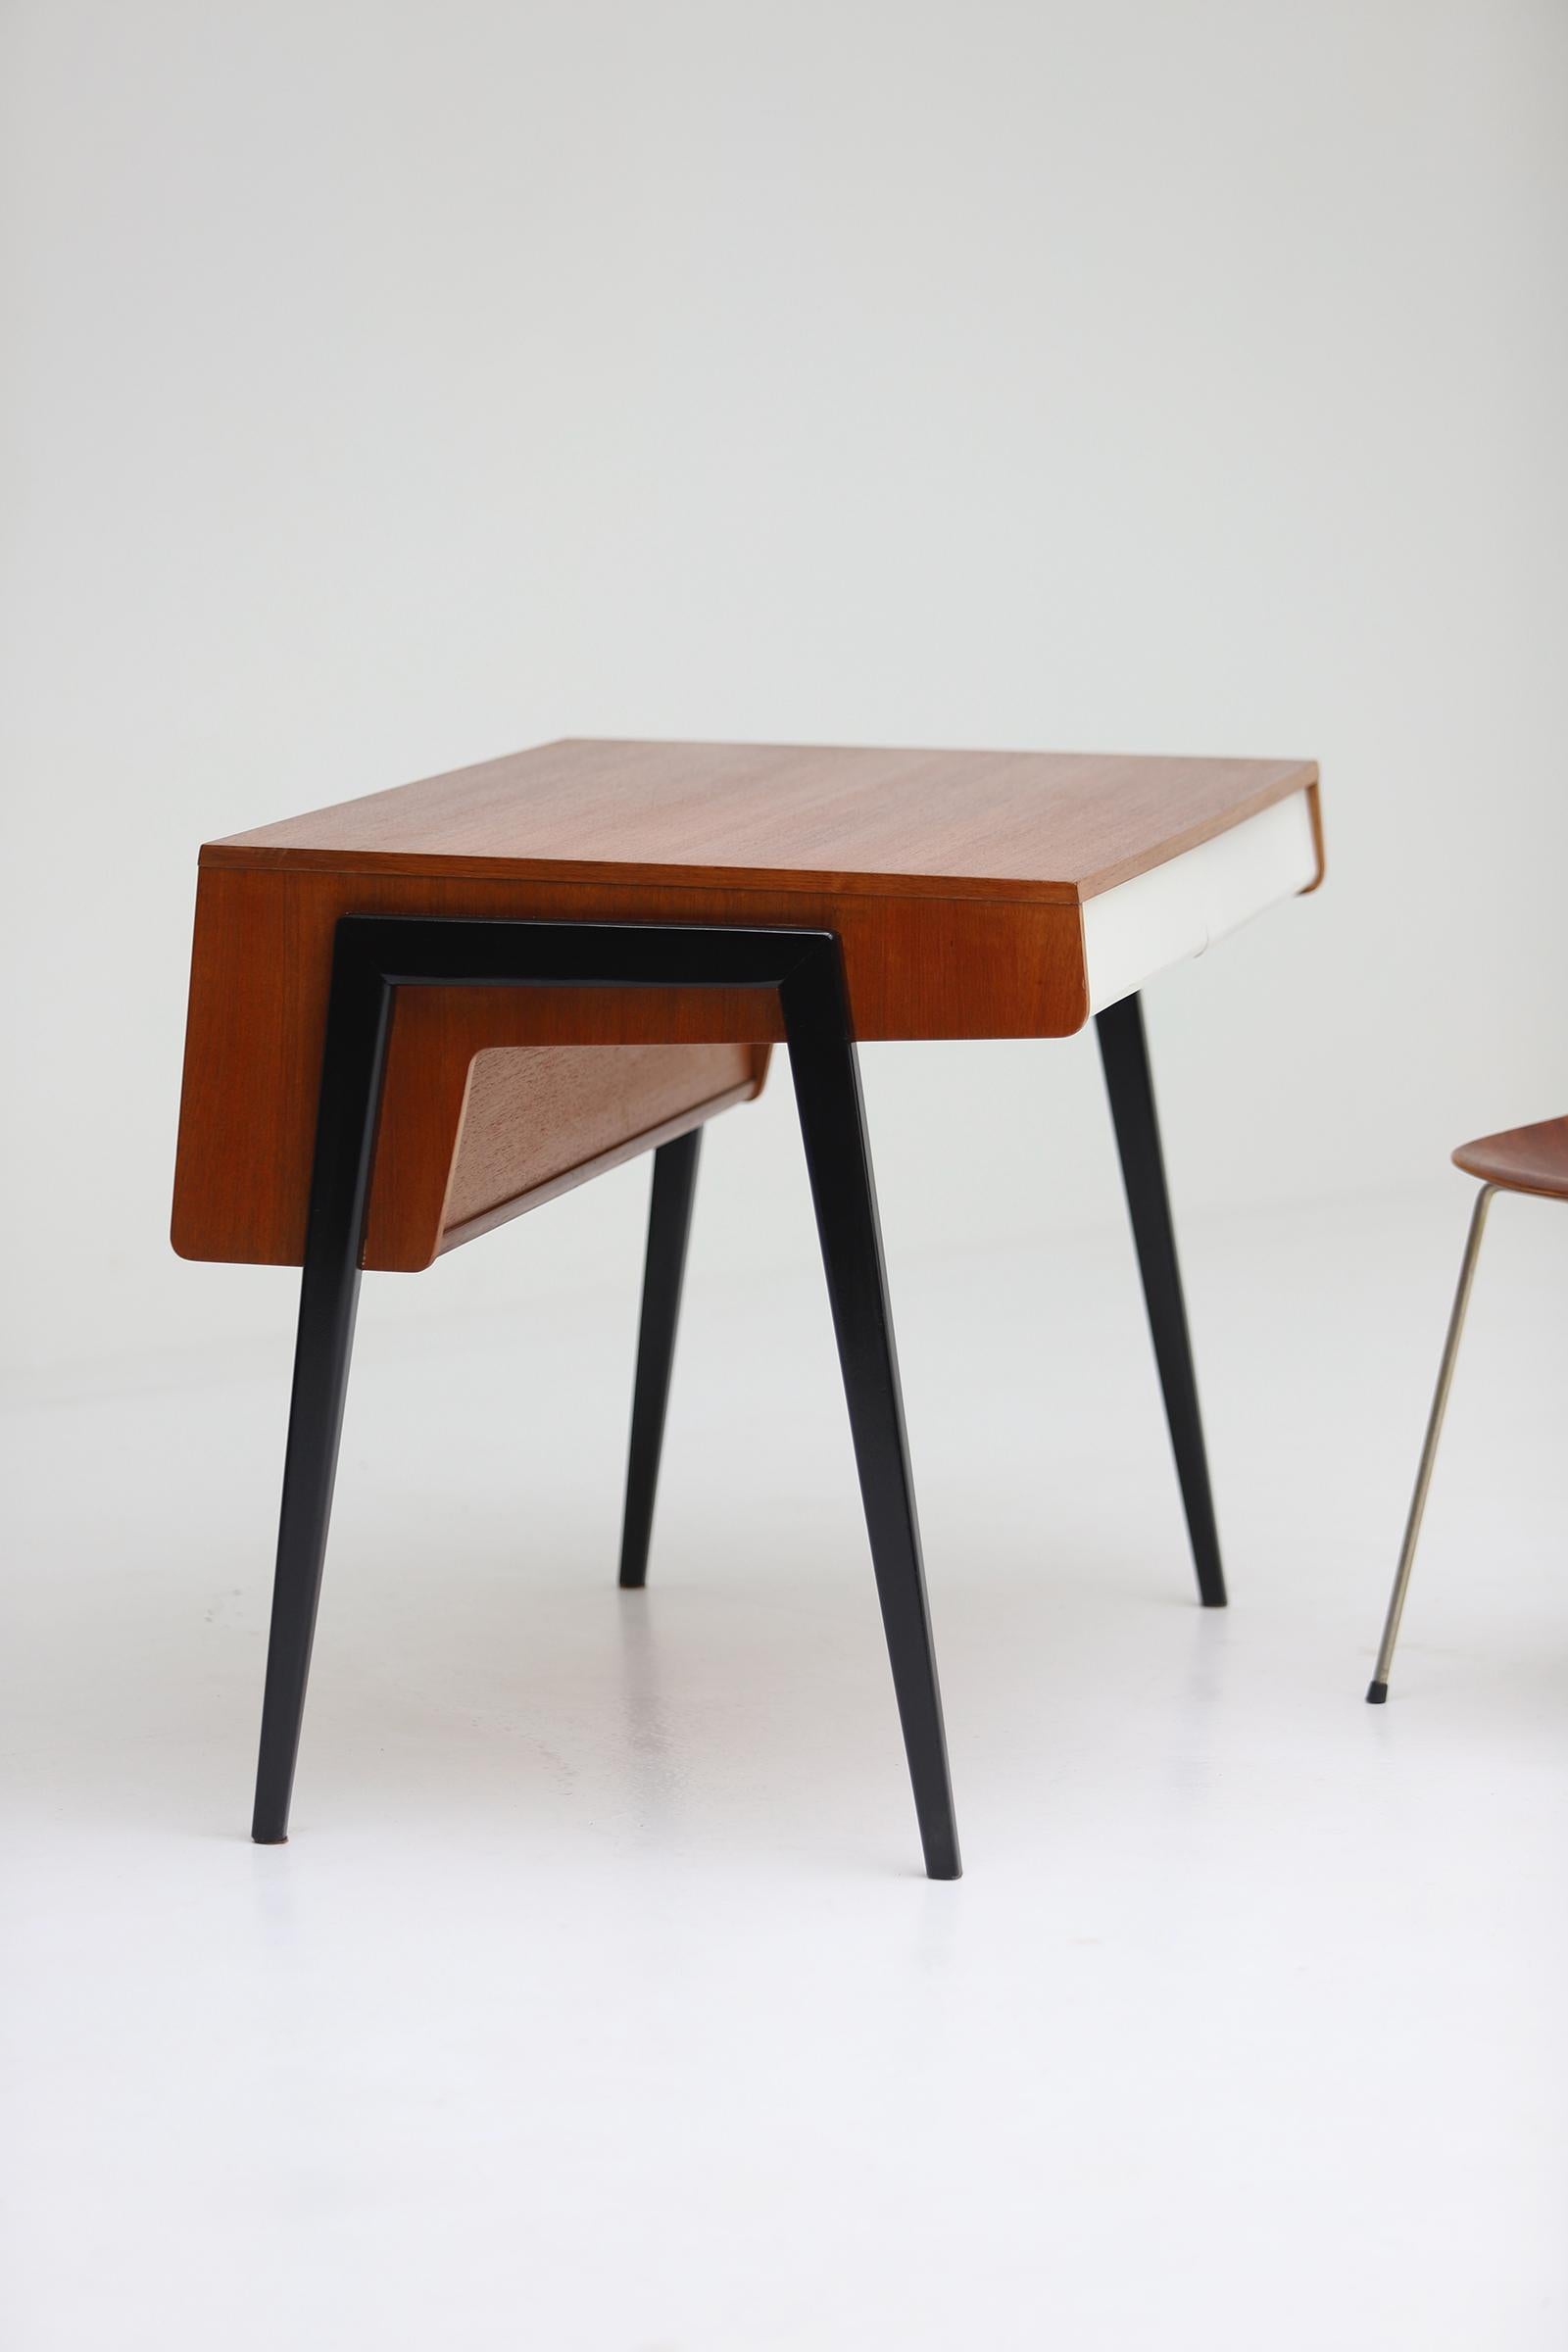 Dutch Mid-Century Modern Writing Desk Manufactured by Everest in the 1950s